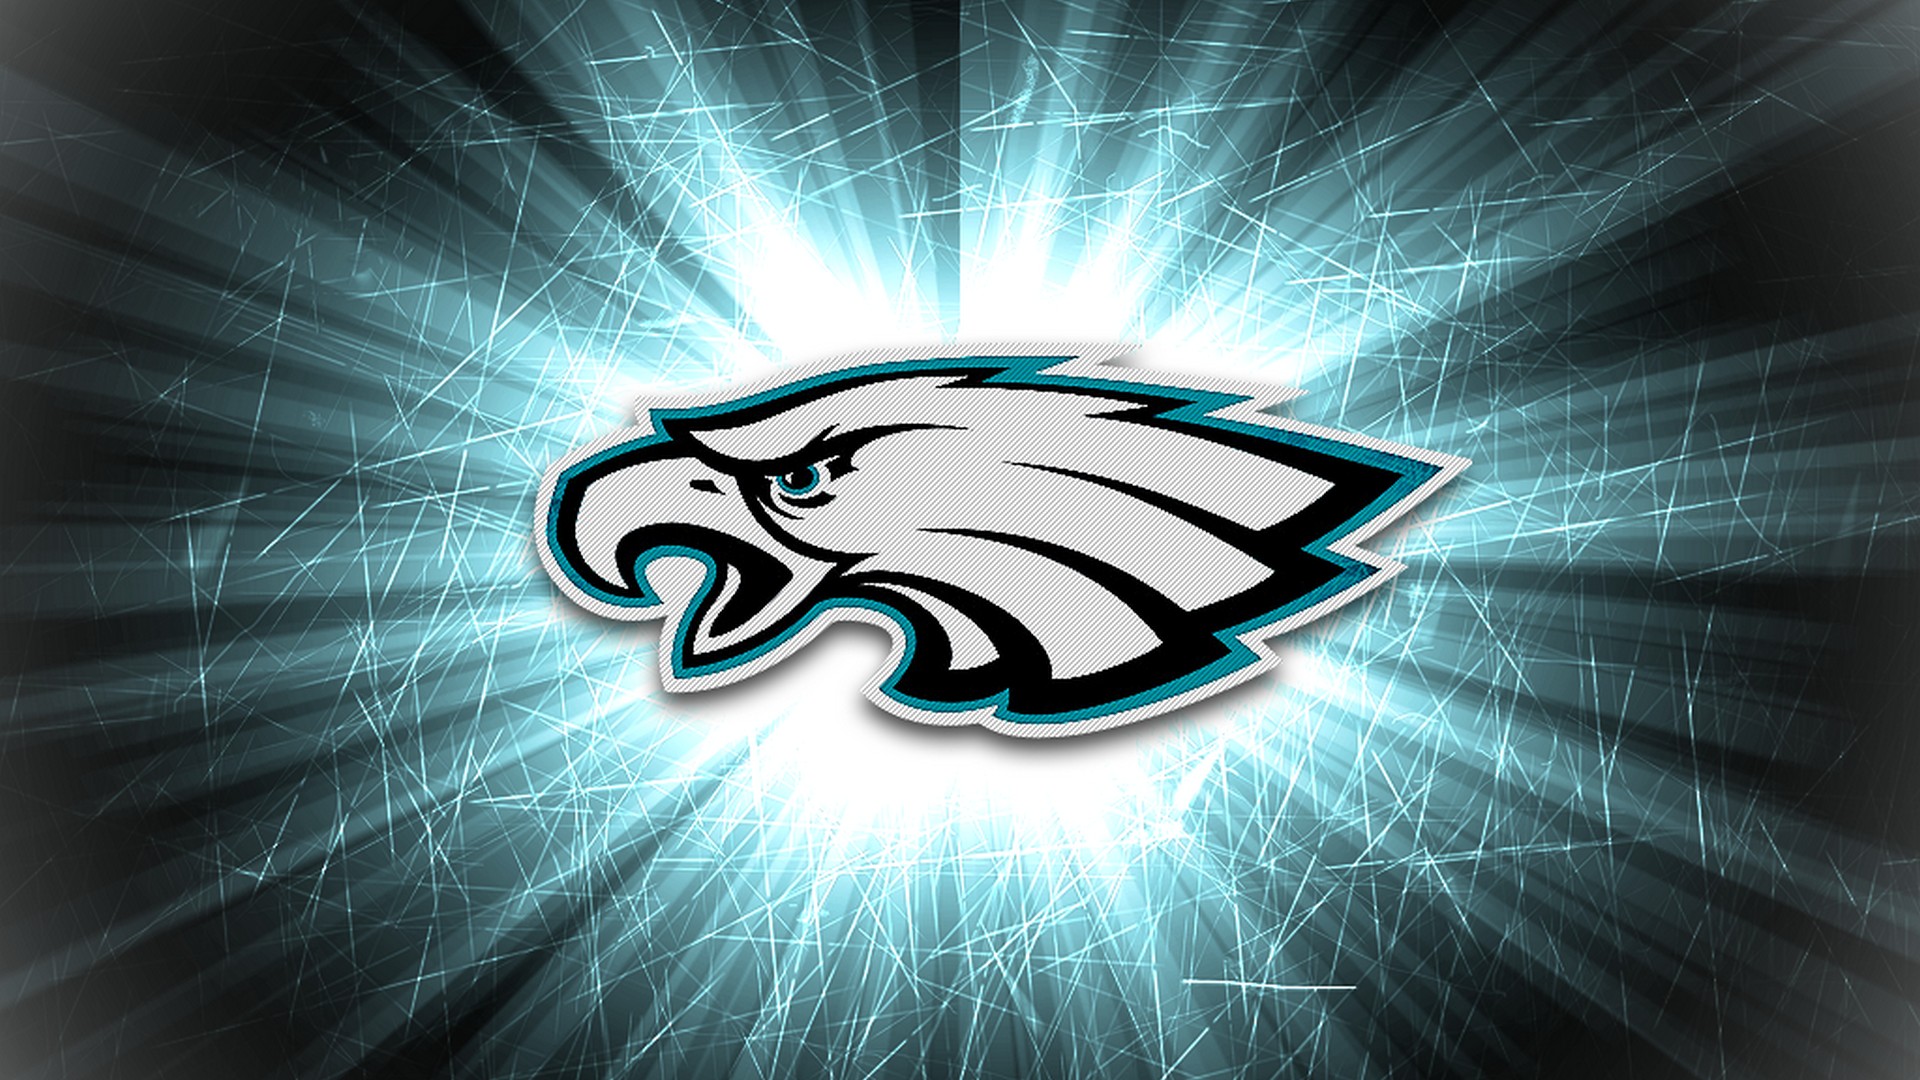 NFL Eagles Desktop Wallpaper With Resolution 1920X1080 pixel. You can make this wallpaper for your Mac or Windows Desktop Background, iPhone, Android or Tablet and another Smartphone device for free